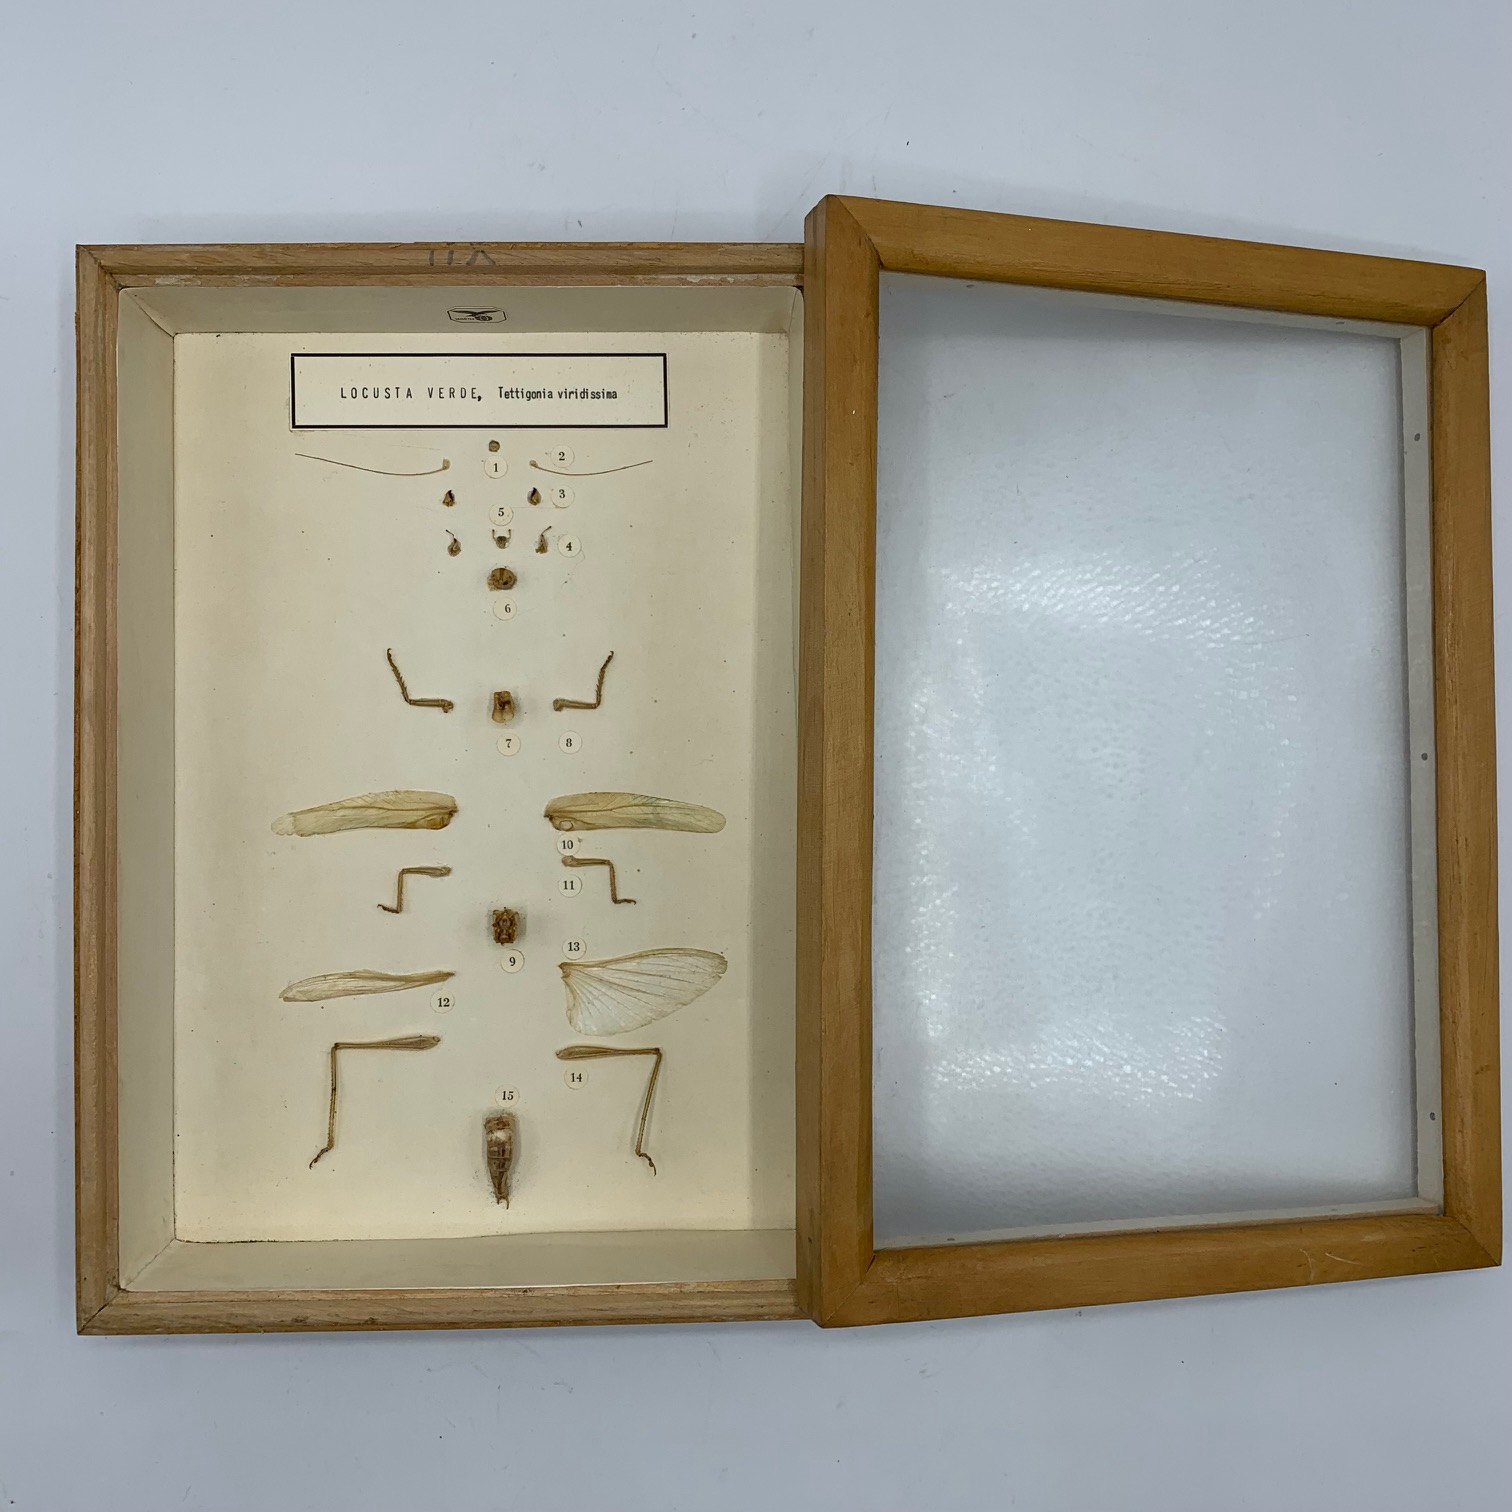 Italian teaching model with the anatomical dissection of a grasshopper